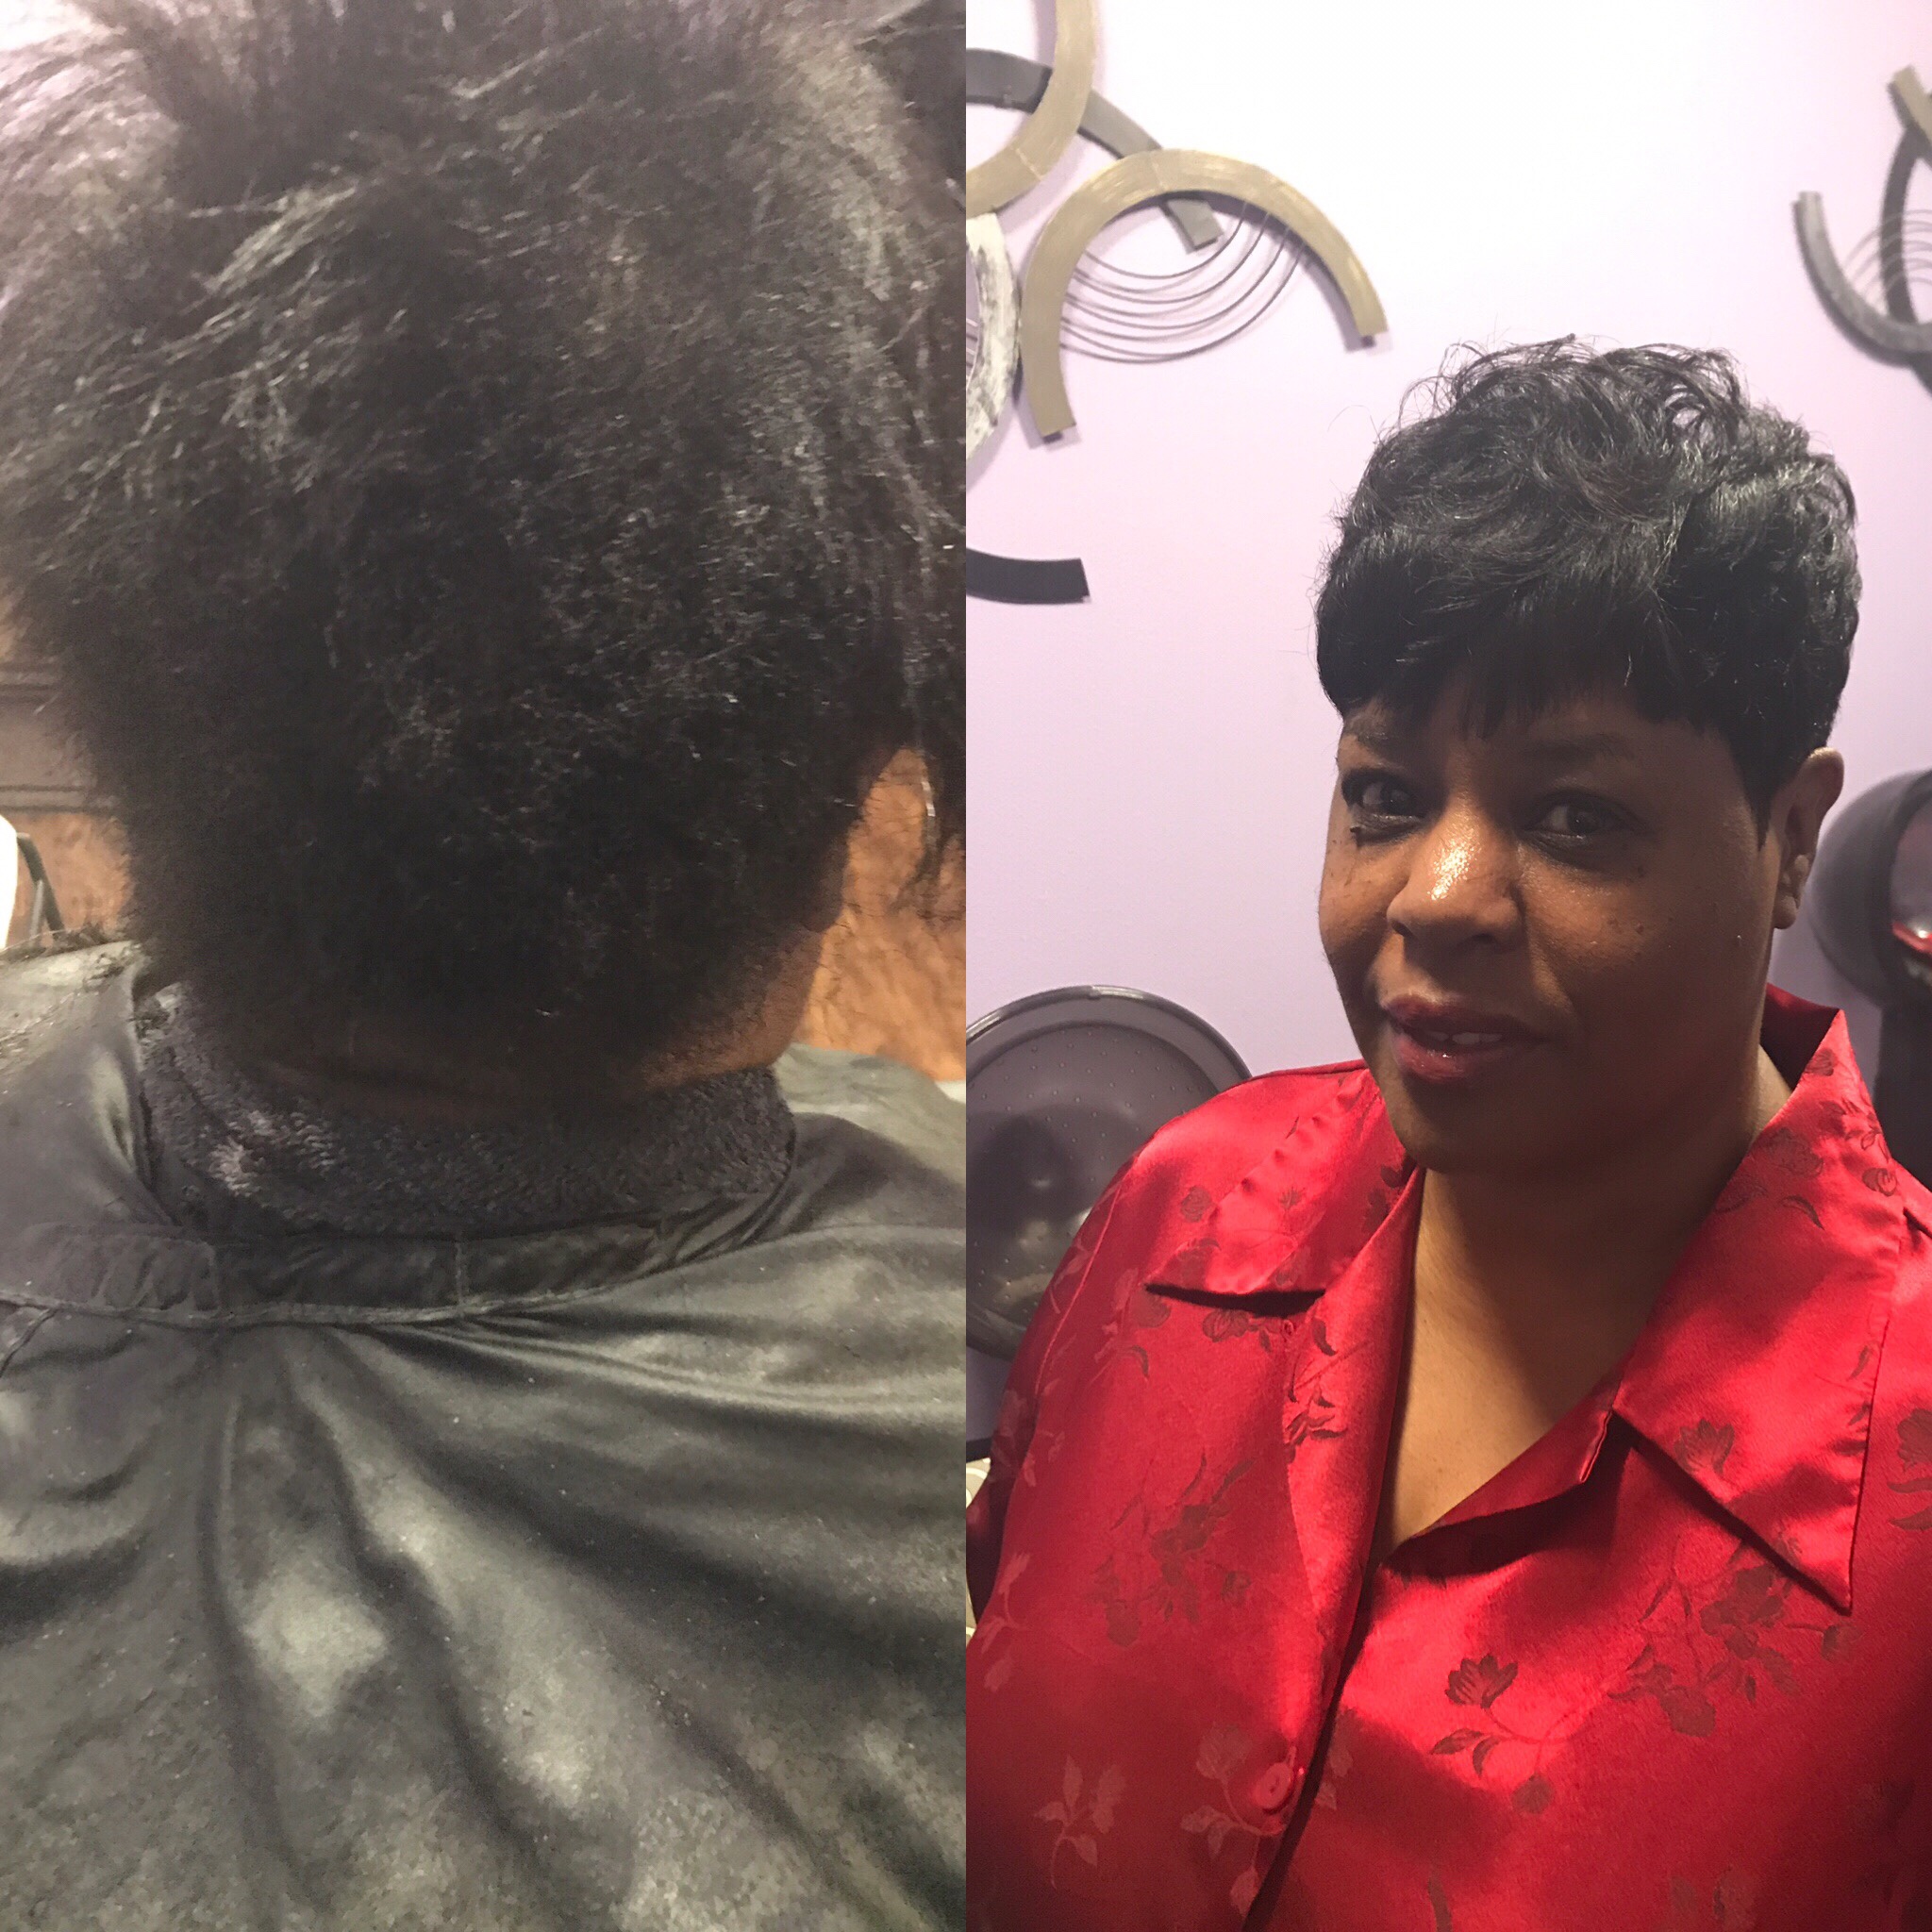 Relaxed And Natural Hair Studio In Irving TX | Vagaro